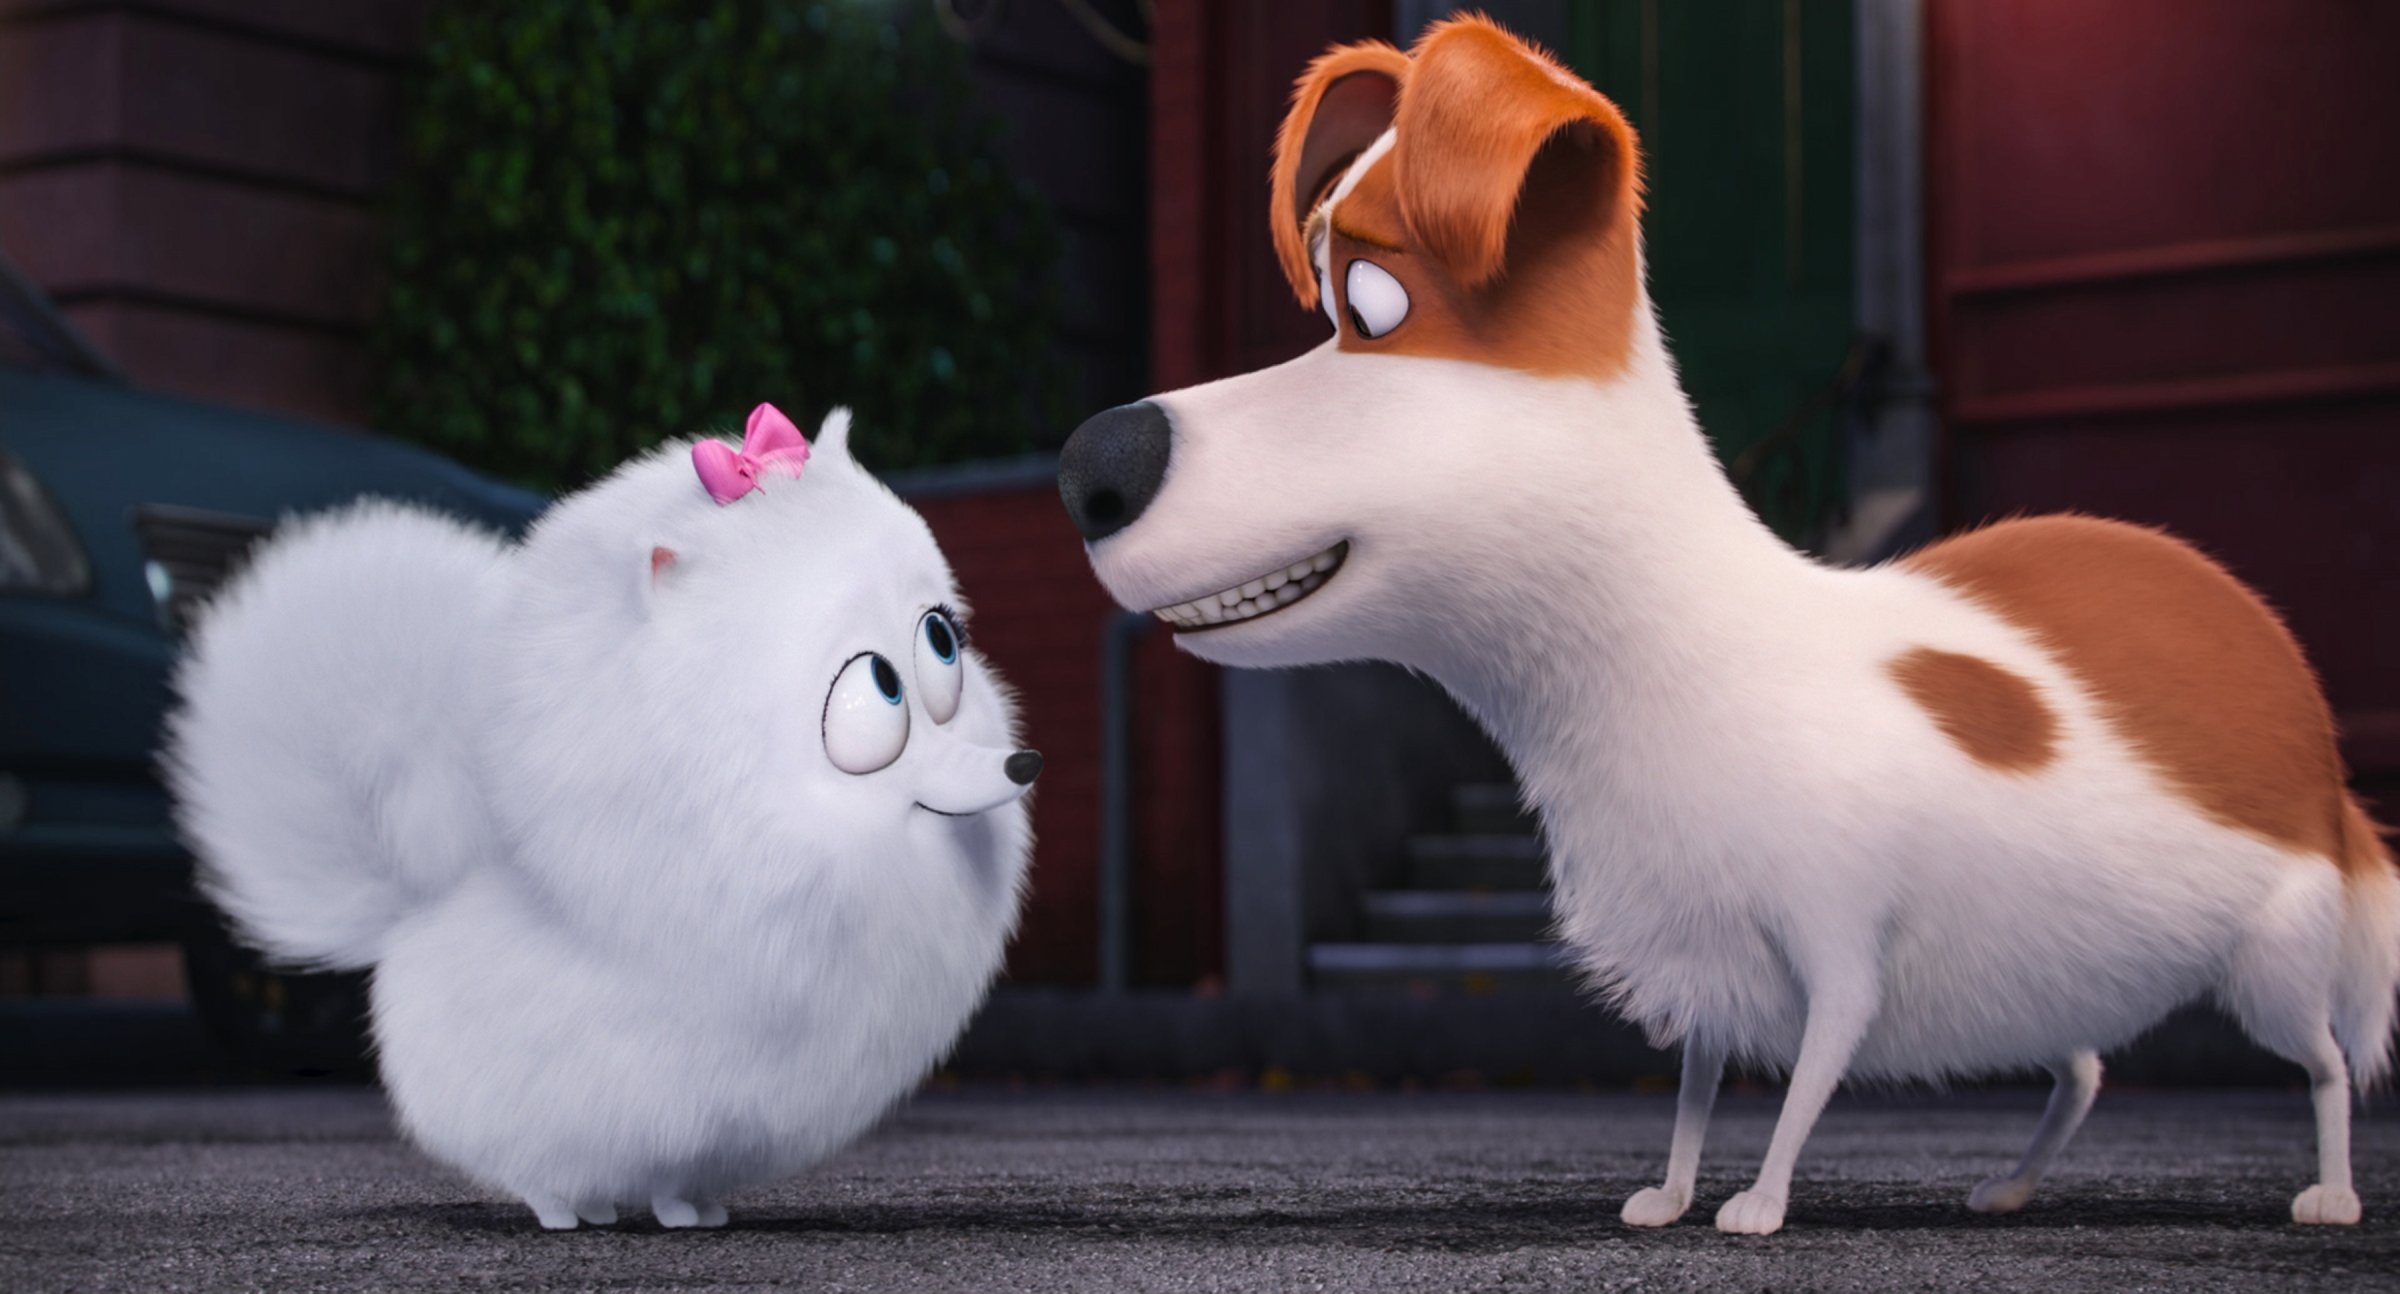 Gidget, voiced by Jenny Slate, left, and Max, voiced by Louis C.K. in The Secret Lives of Pets.